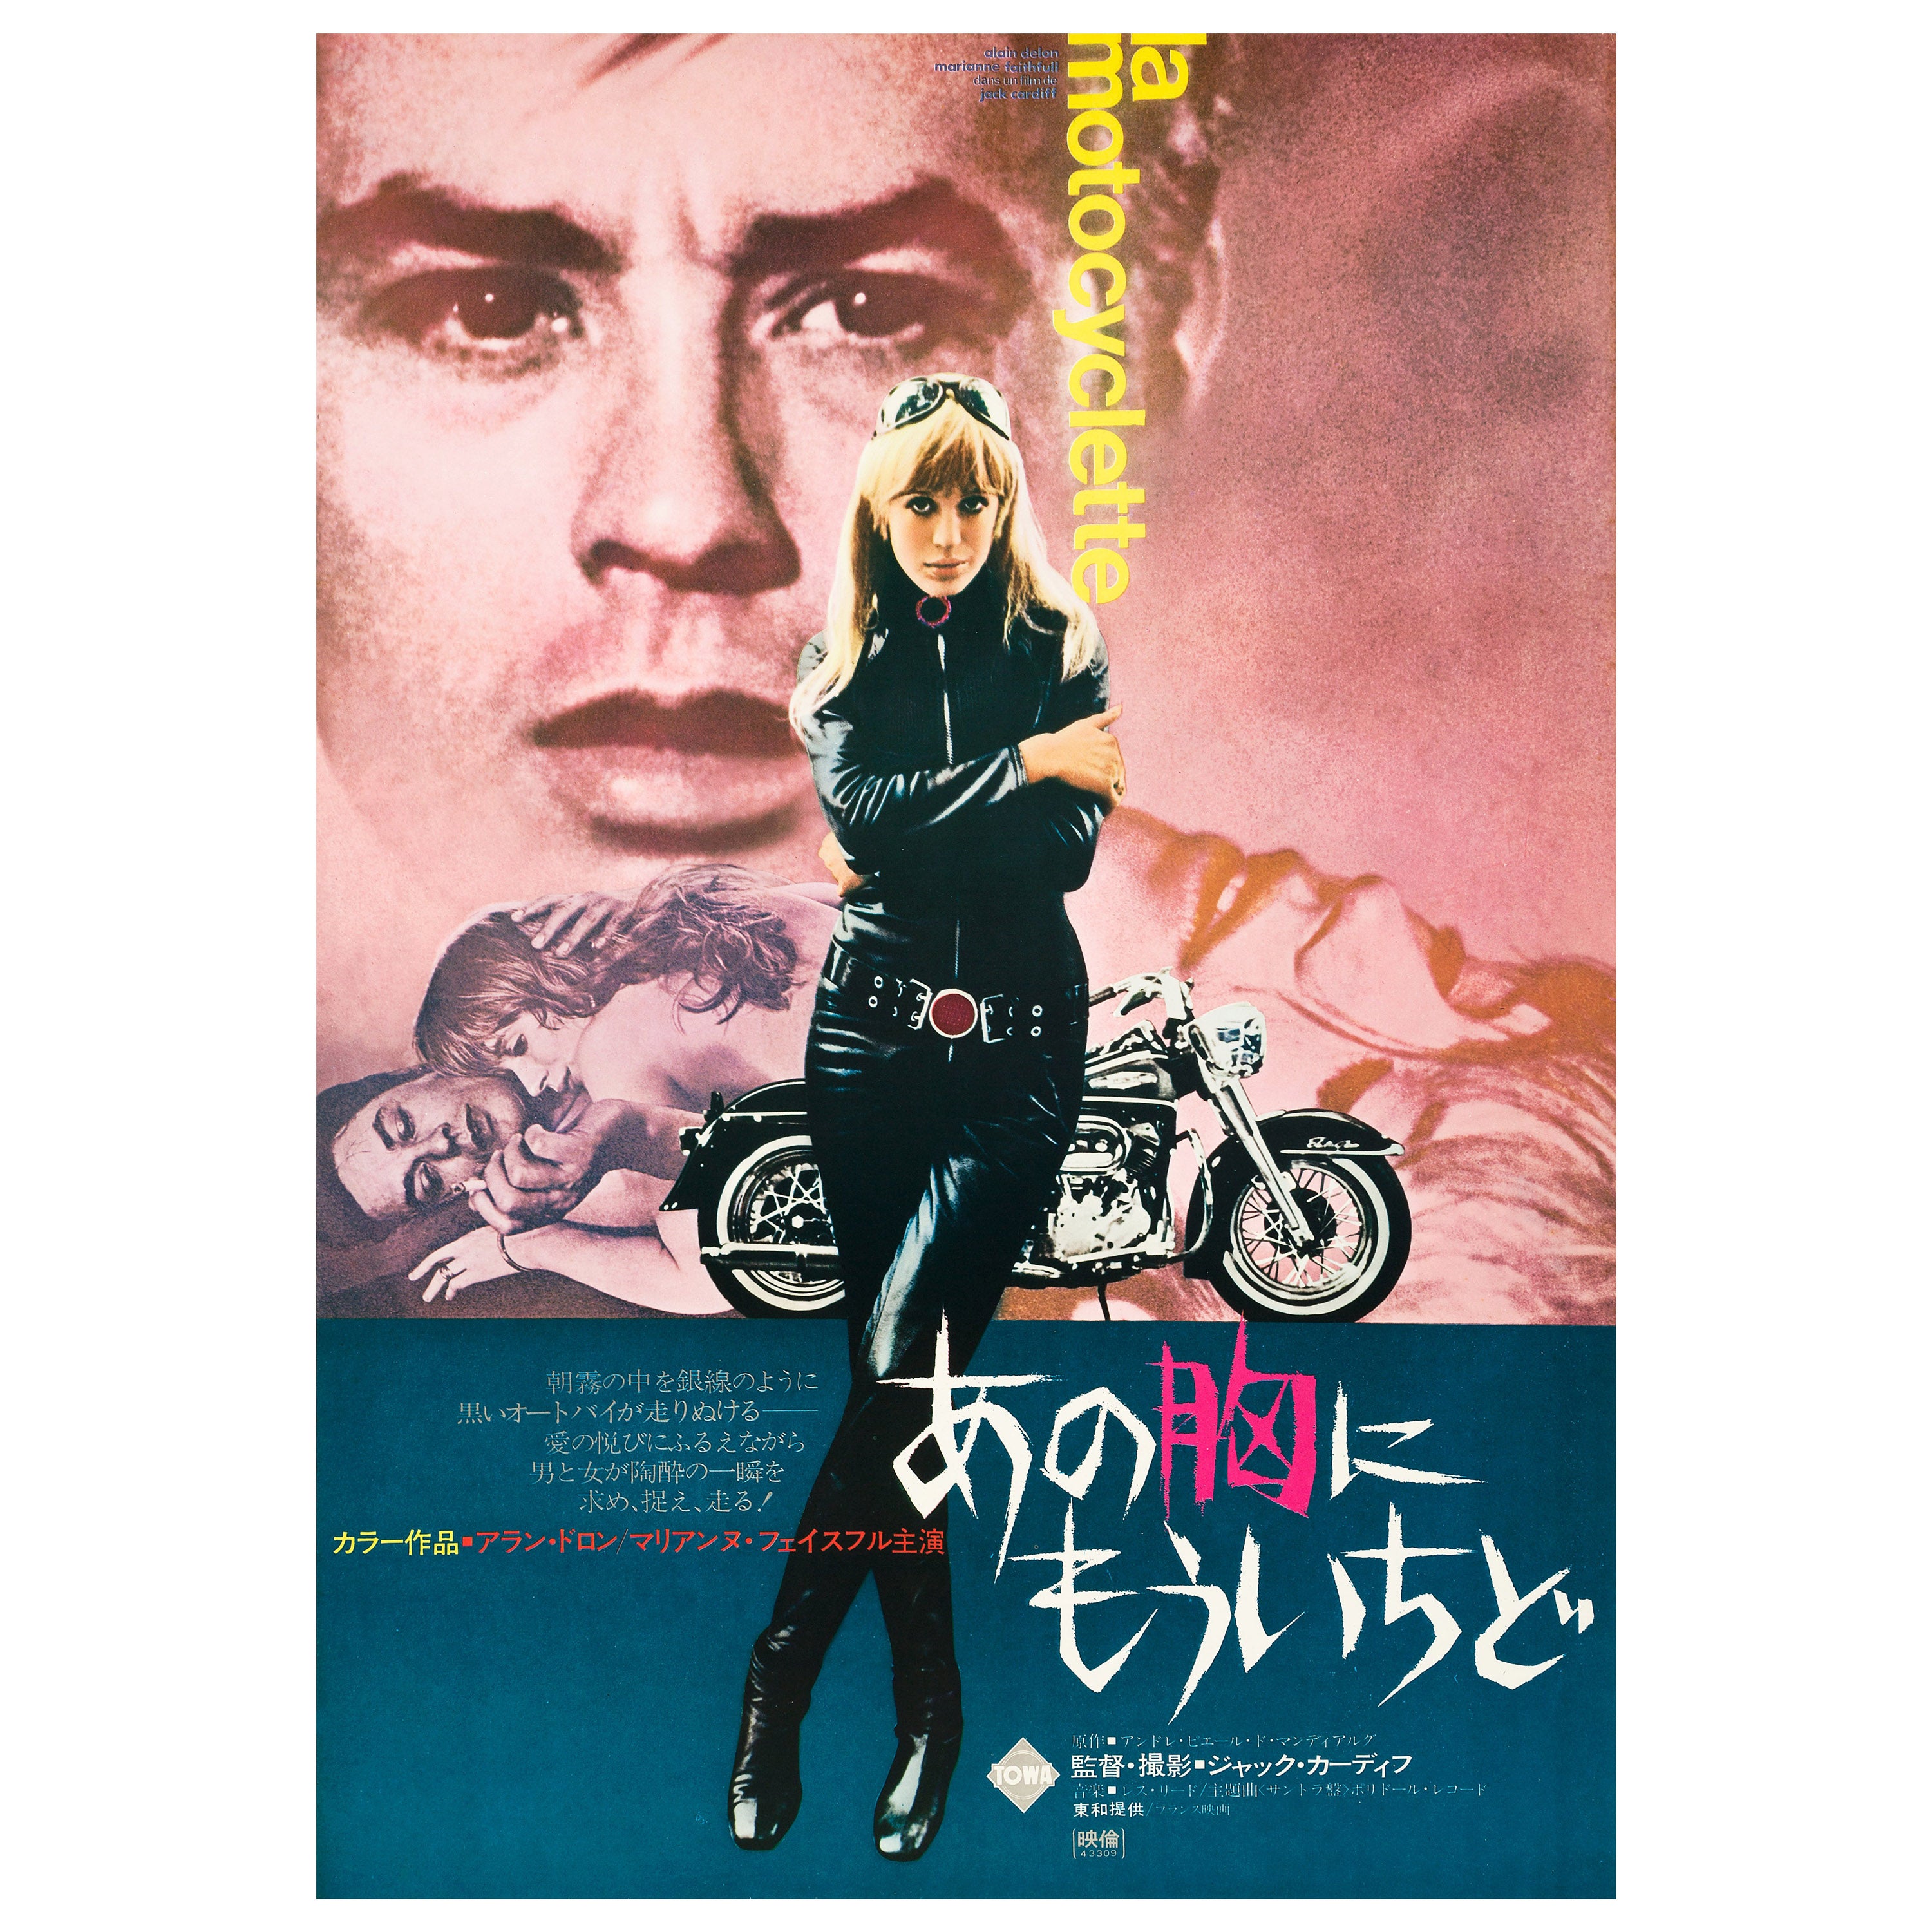 'The Girl on a Motorcycle' Original Vintage Movie Poster, Japanese, 1968